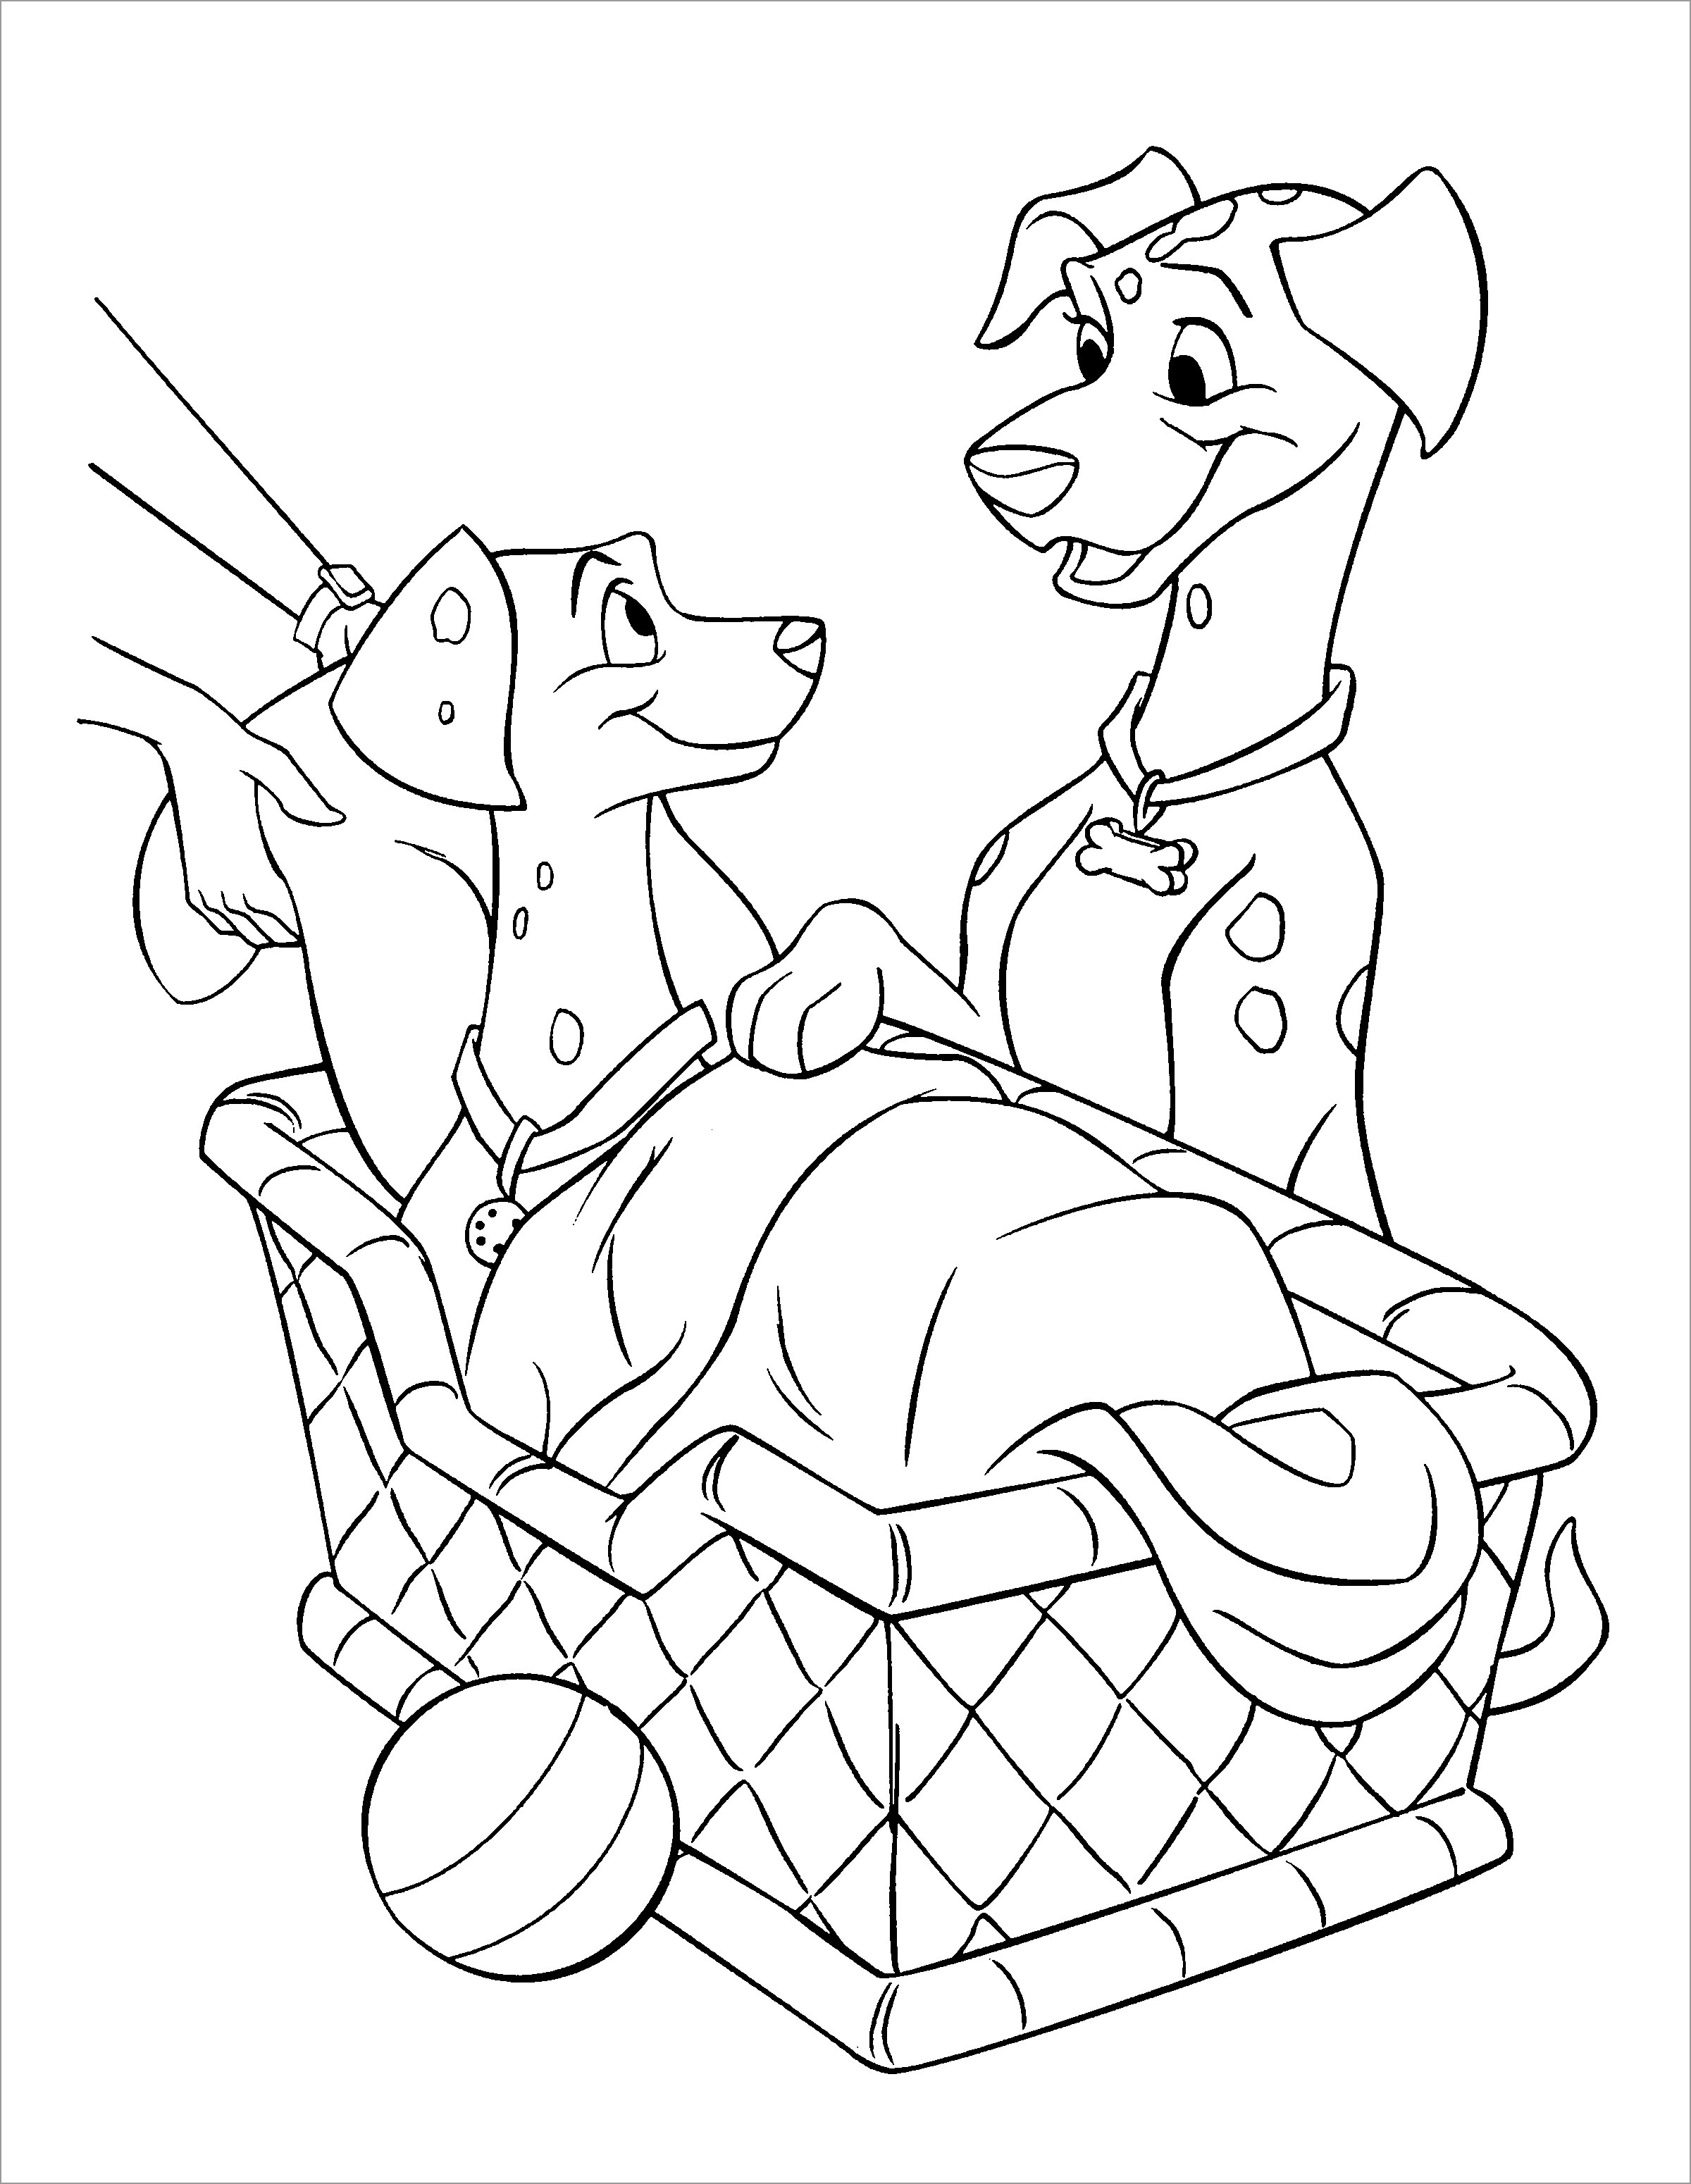 101 Dalmations Coloring Pages Best Coloring Pages For Kids